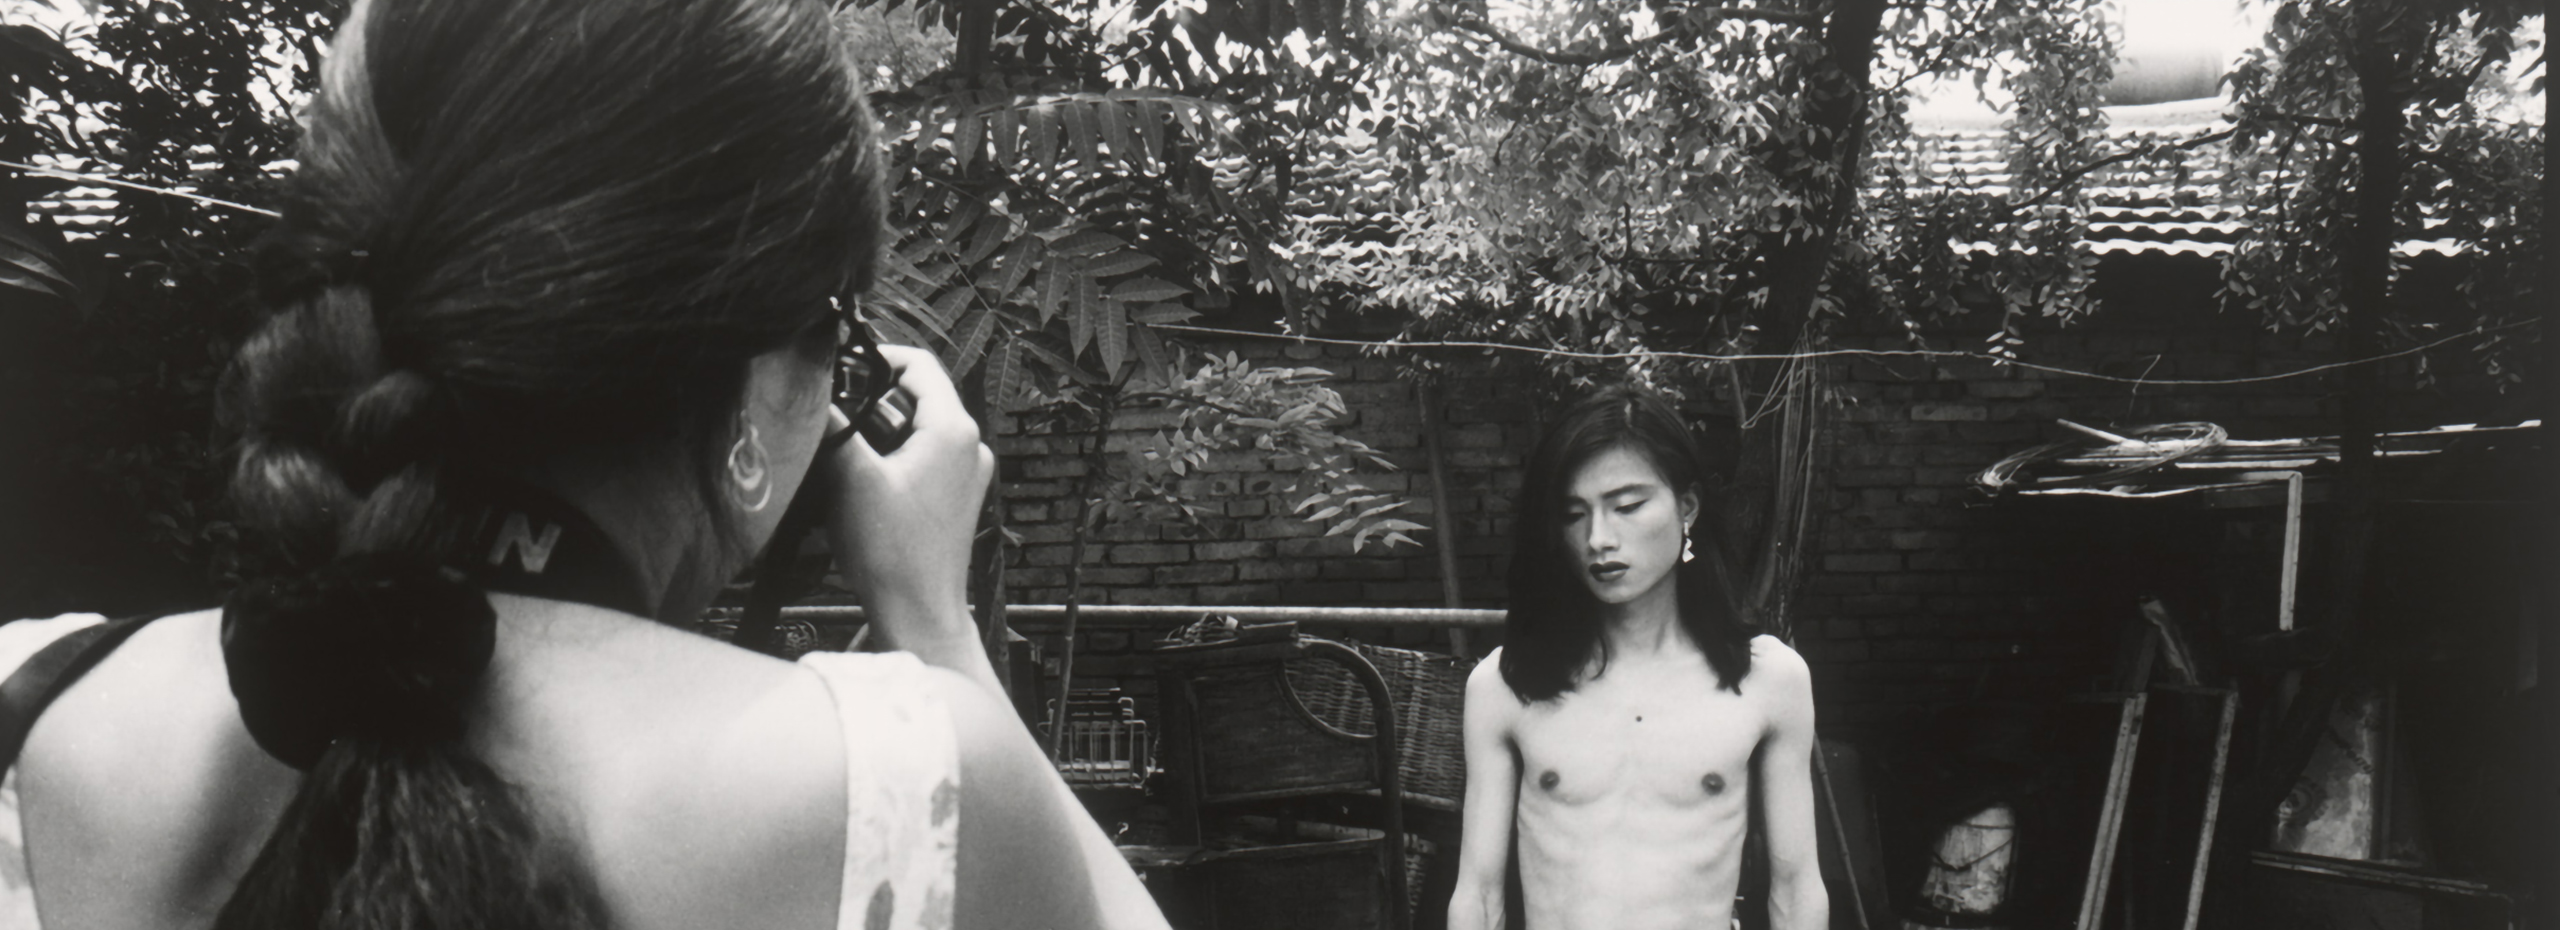 A black and white photograph showing a woman taking a photo of a shirtless man with long hair